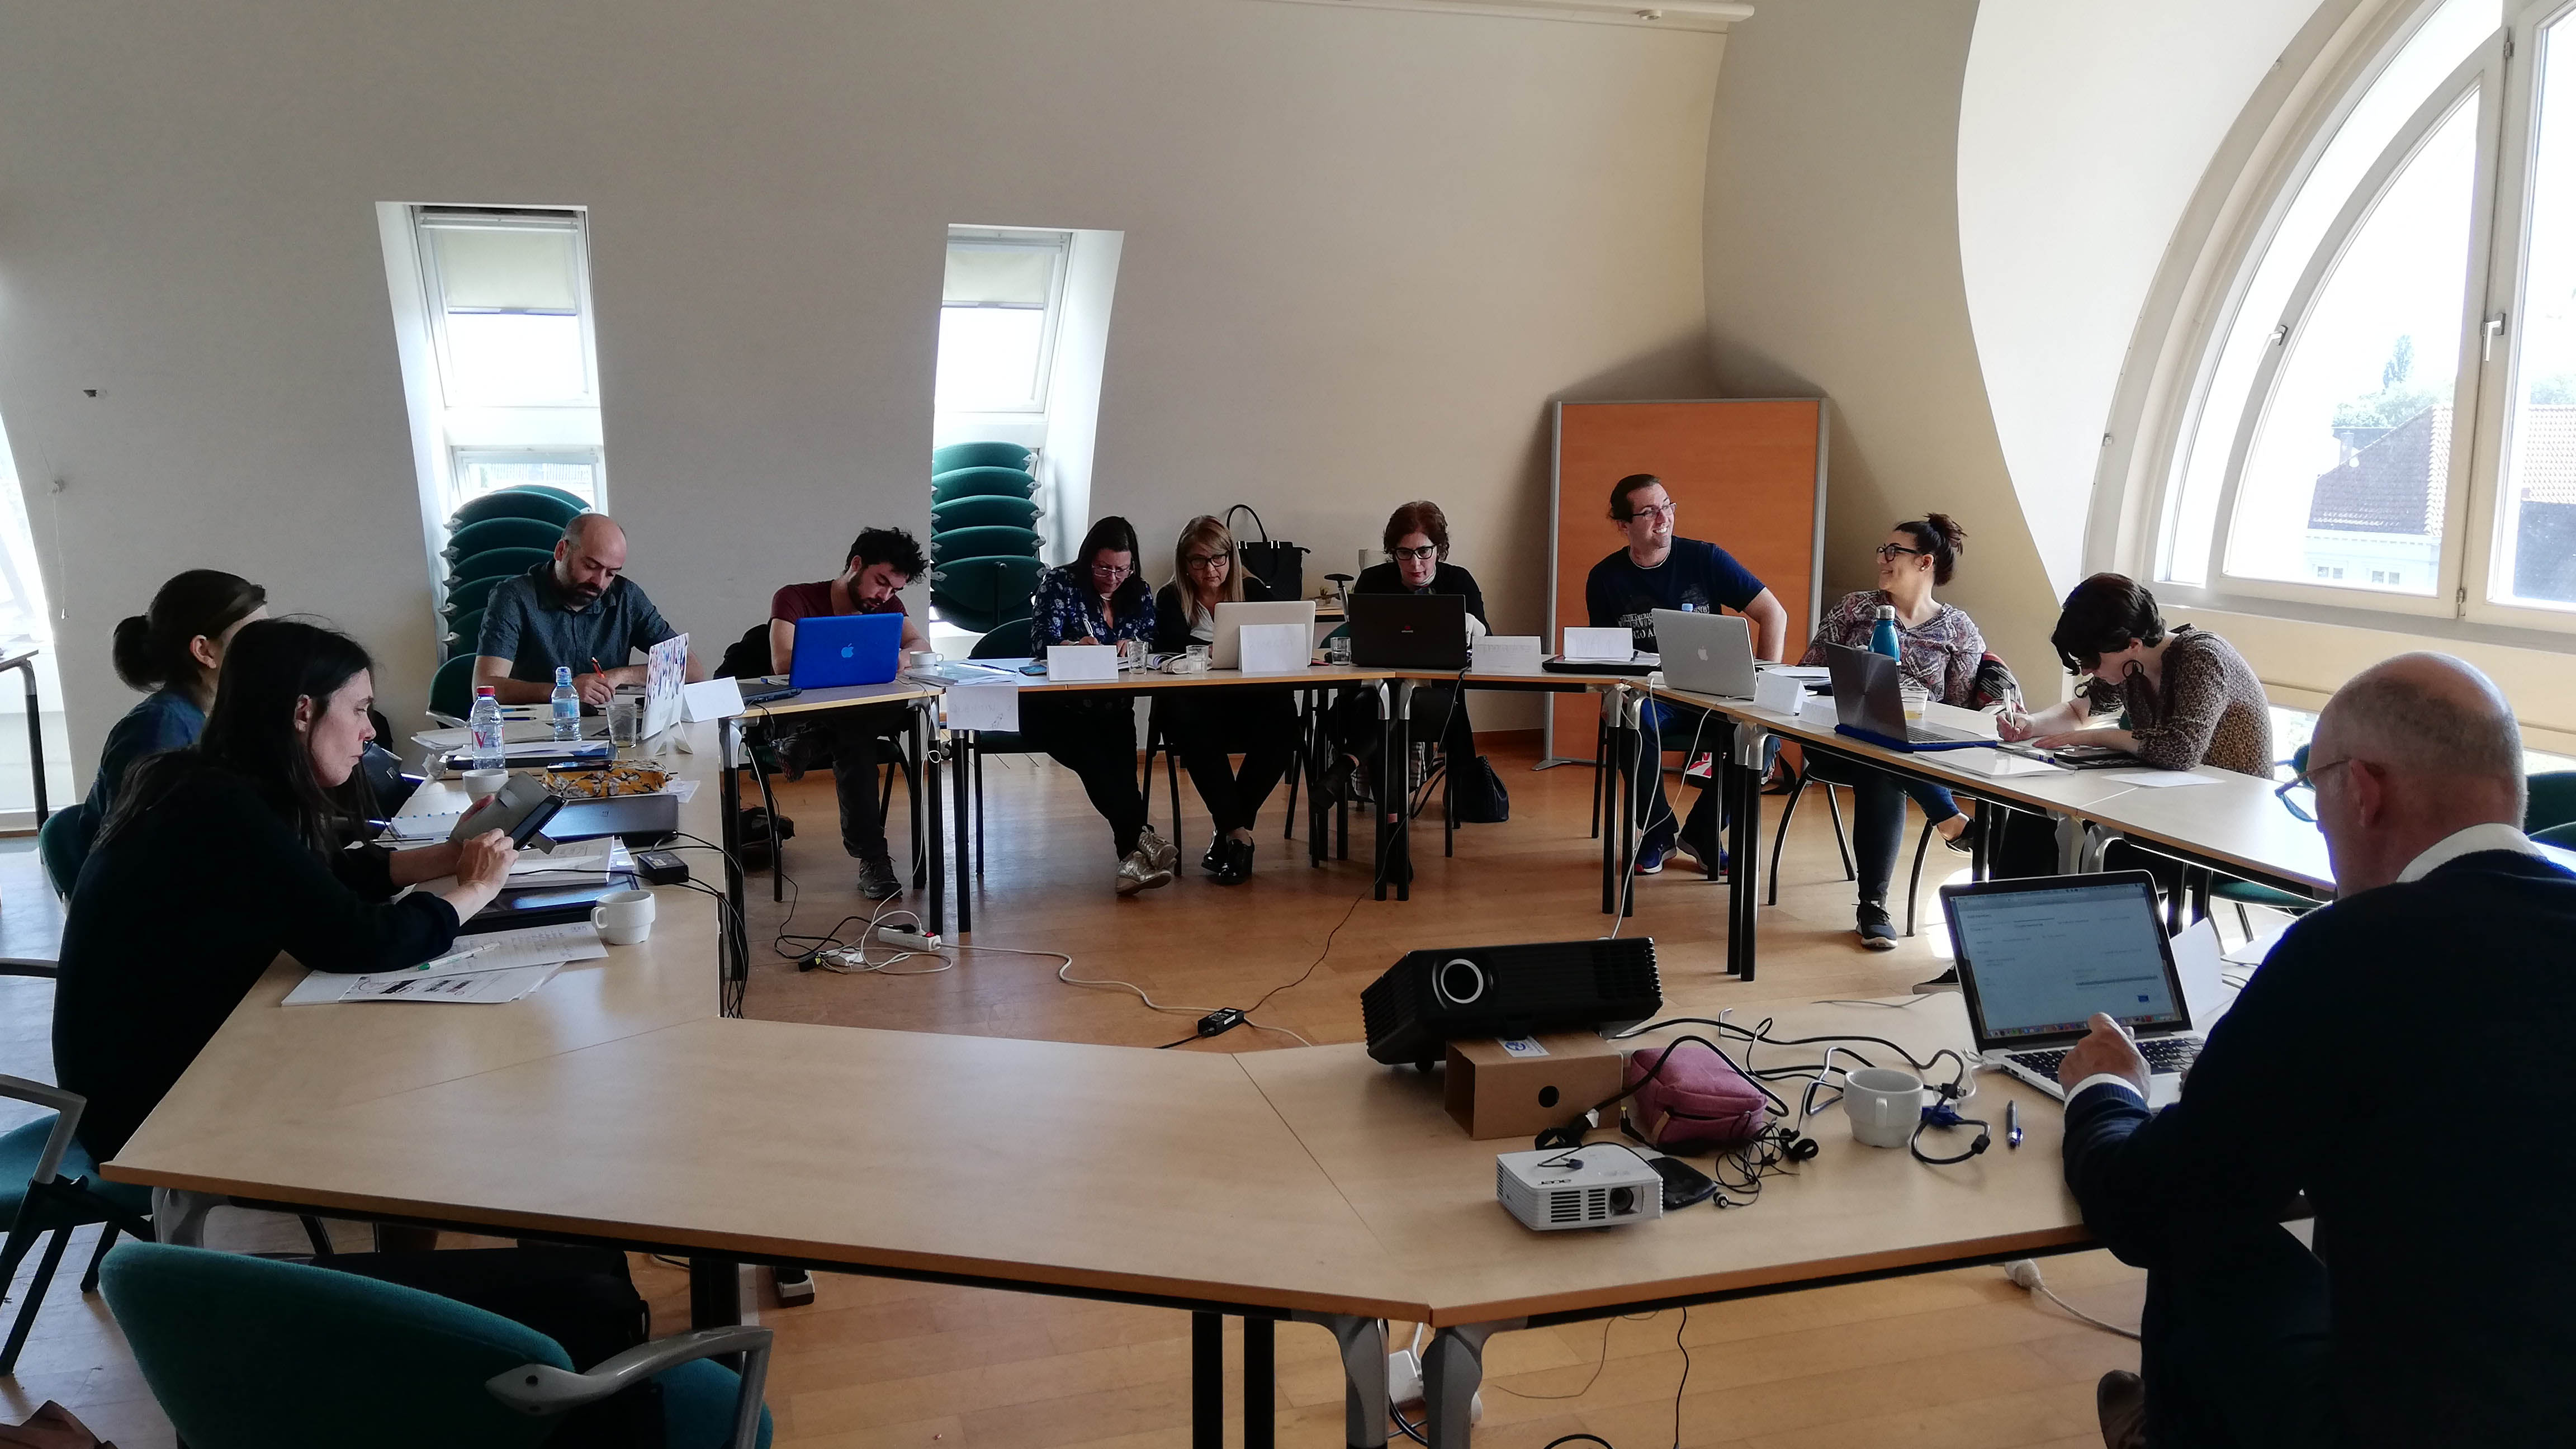 My story Maps: KA2 training course in Belgium